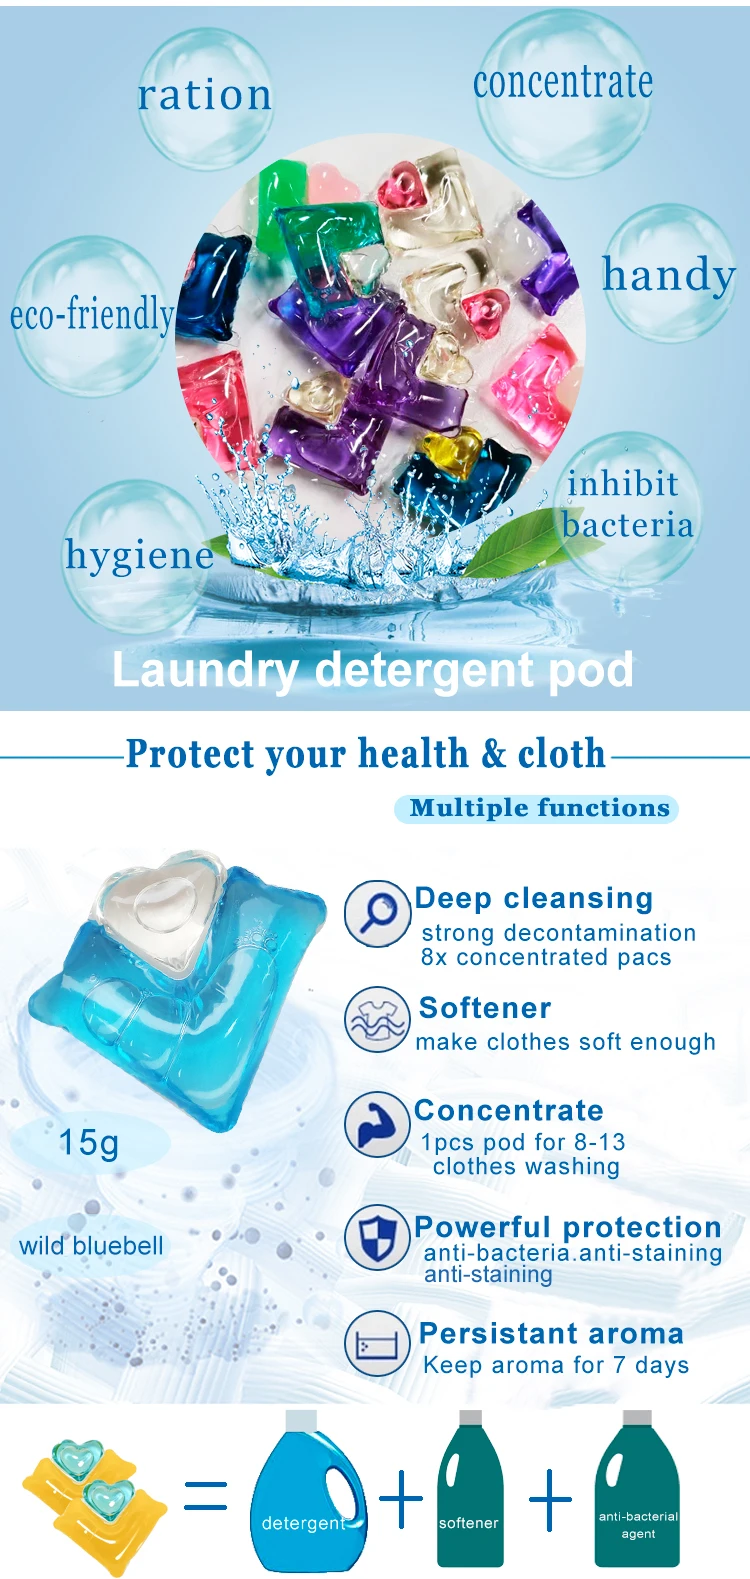 Factory stain remover on behalf Liquid detergent pods mobile PC 3 in 1 laundry beads cleaning laundry detergent